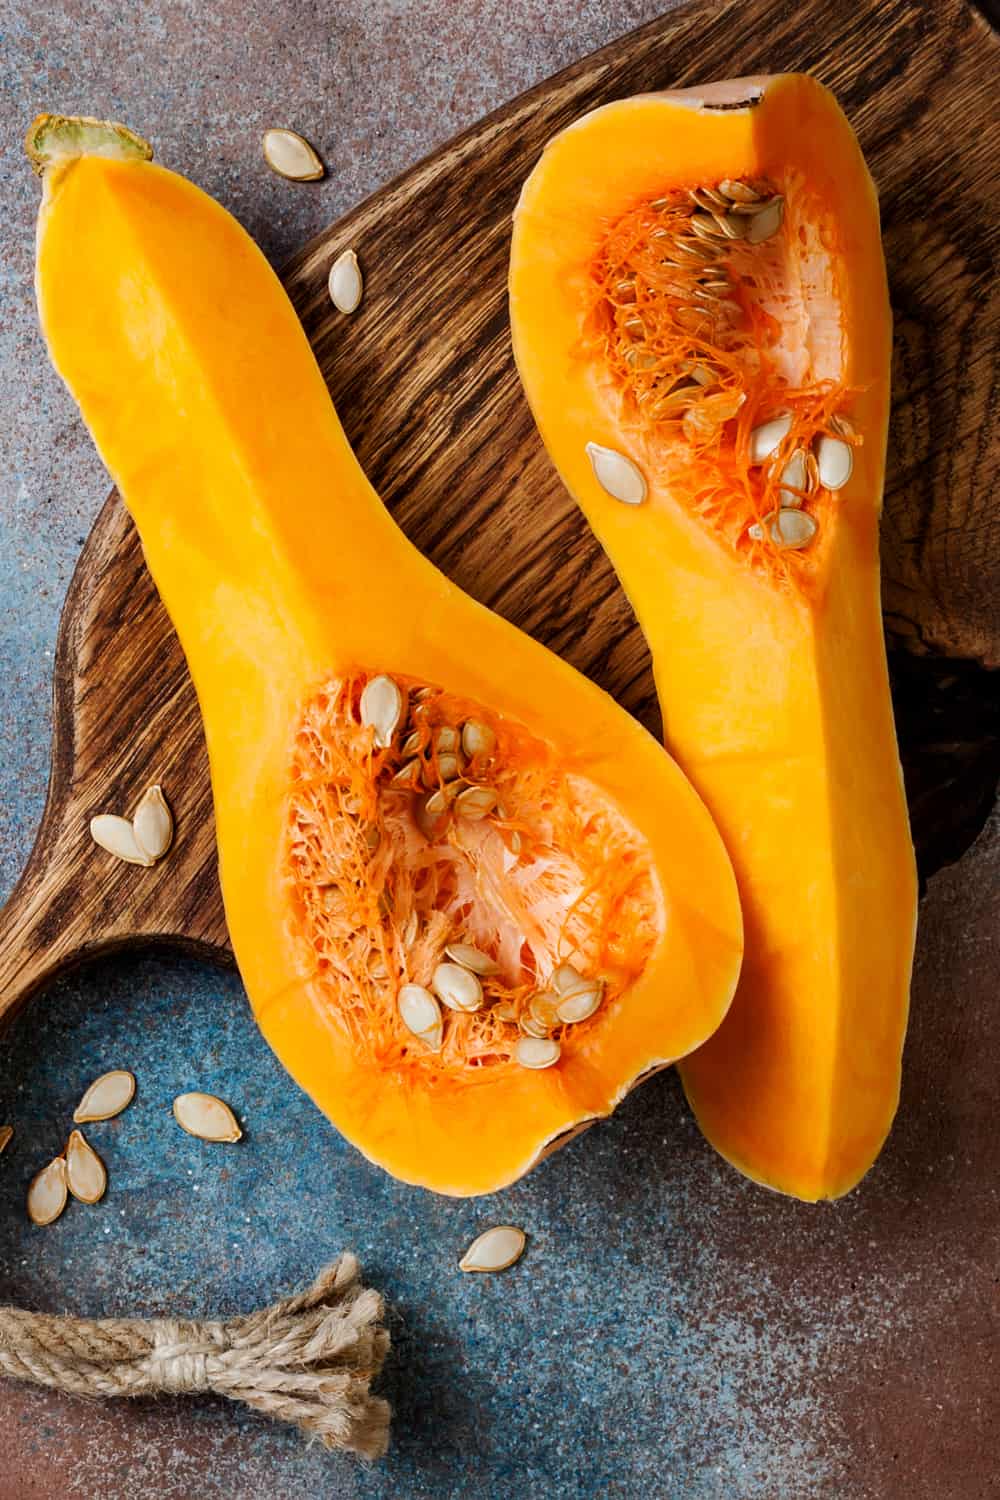 4 Tips to Tell if Butternut Squash has Gone Bad